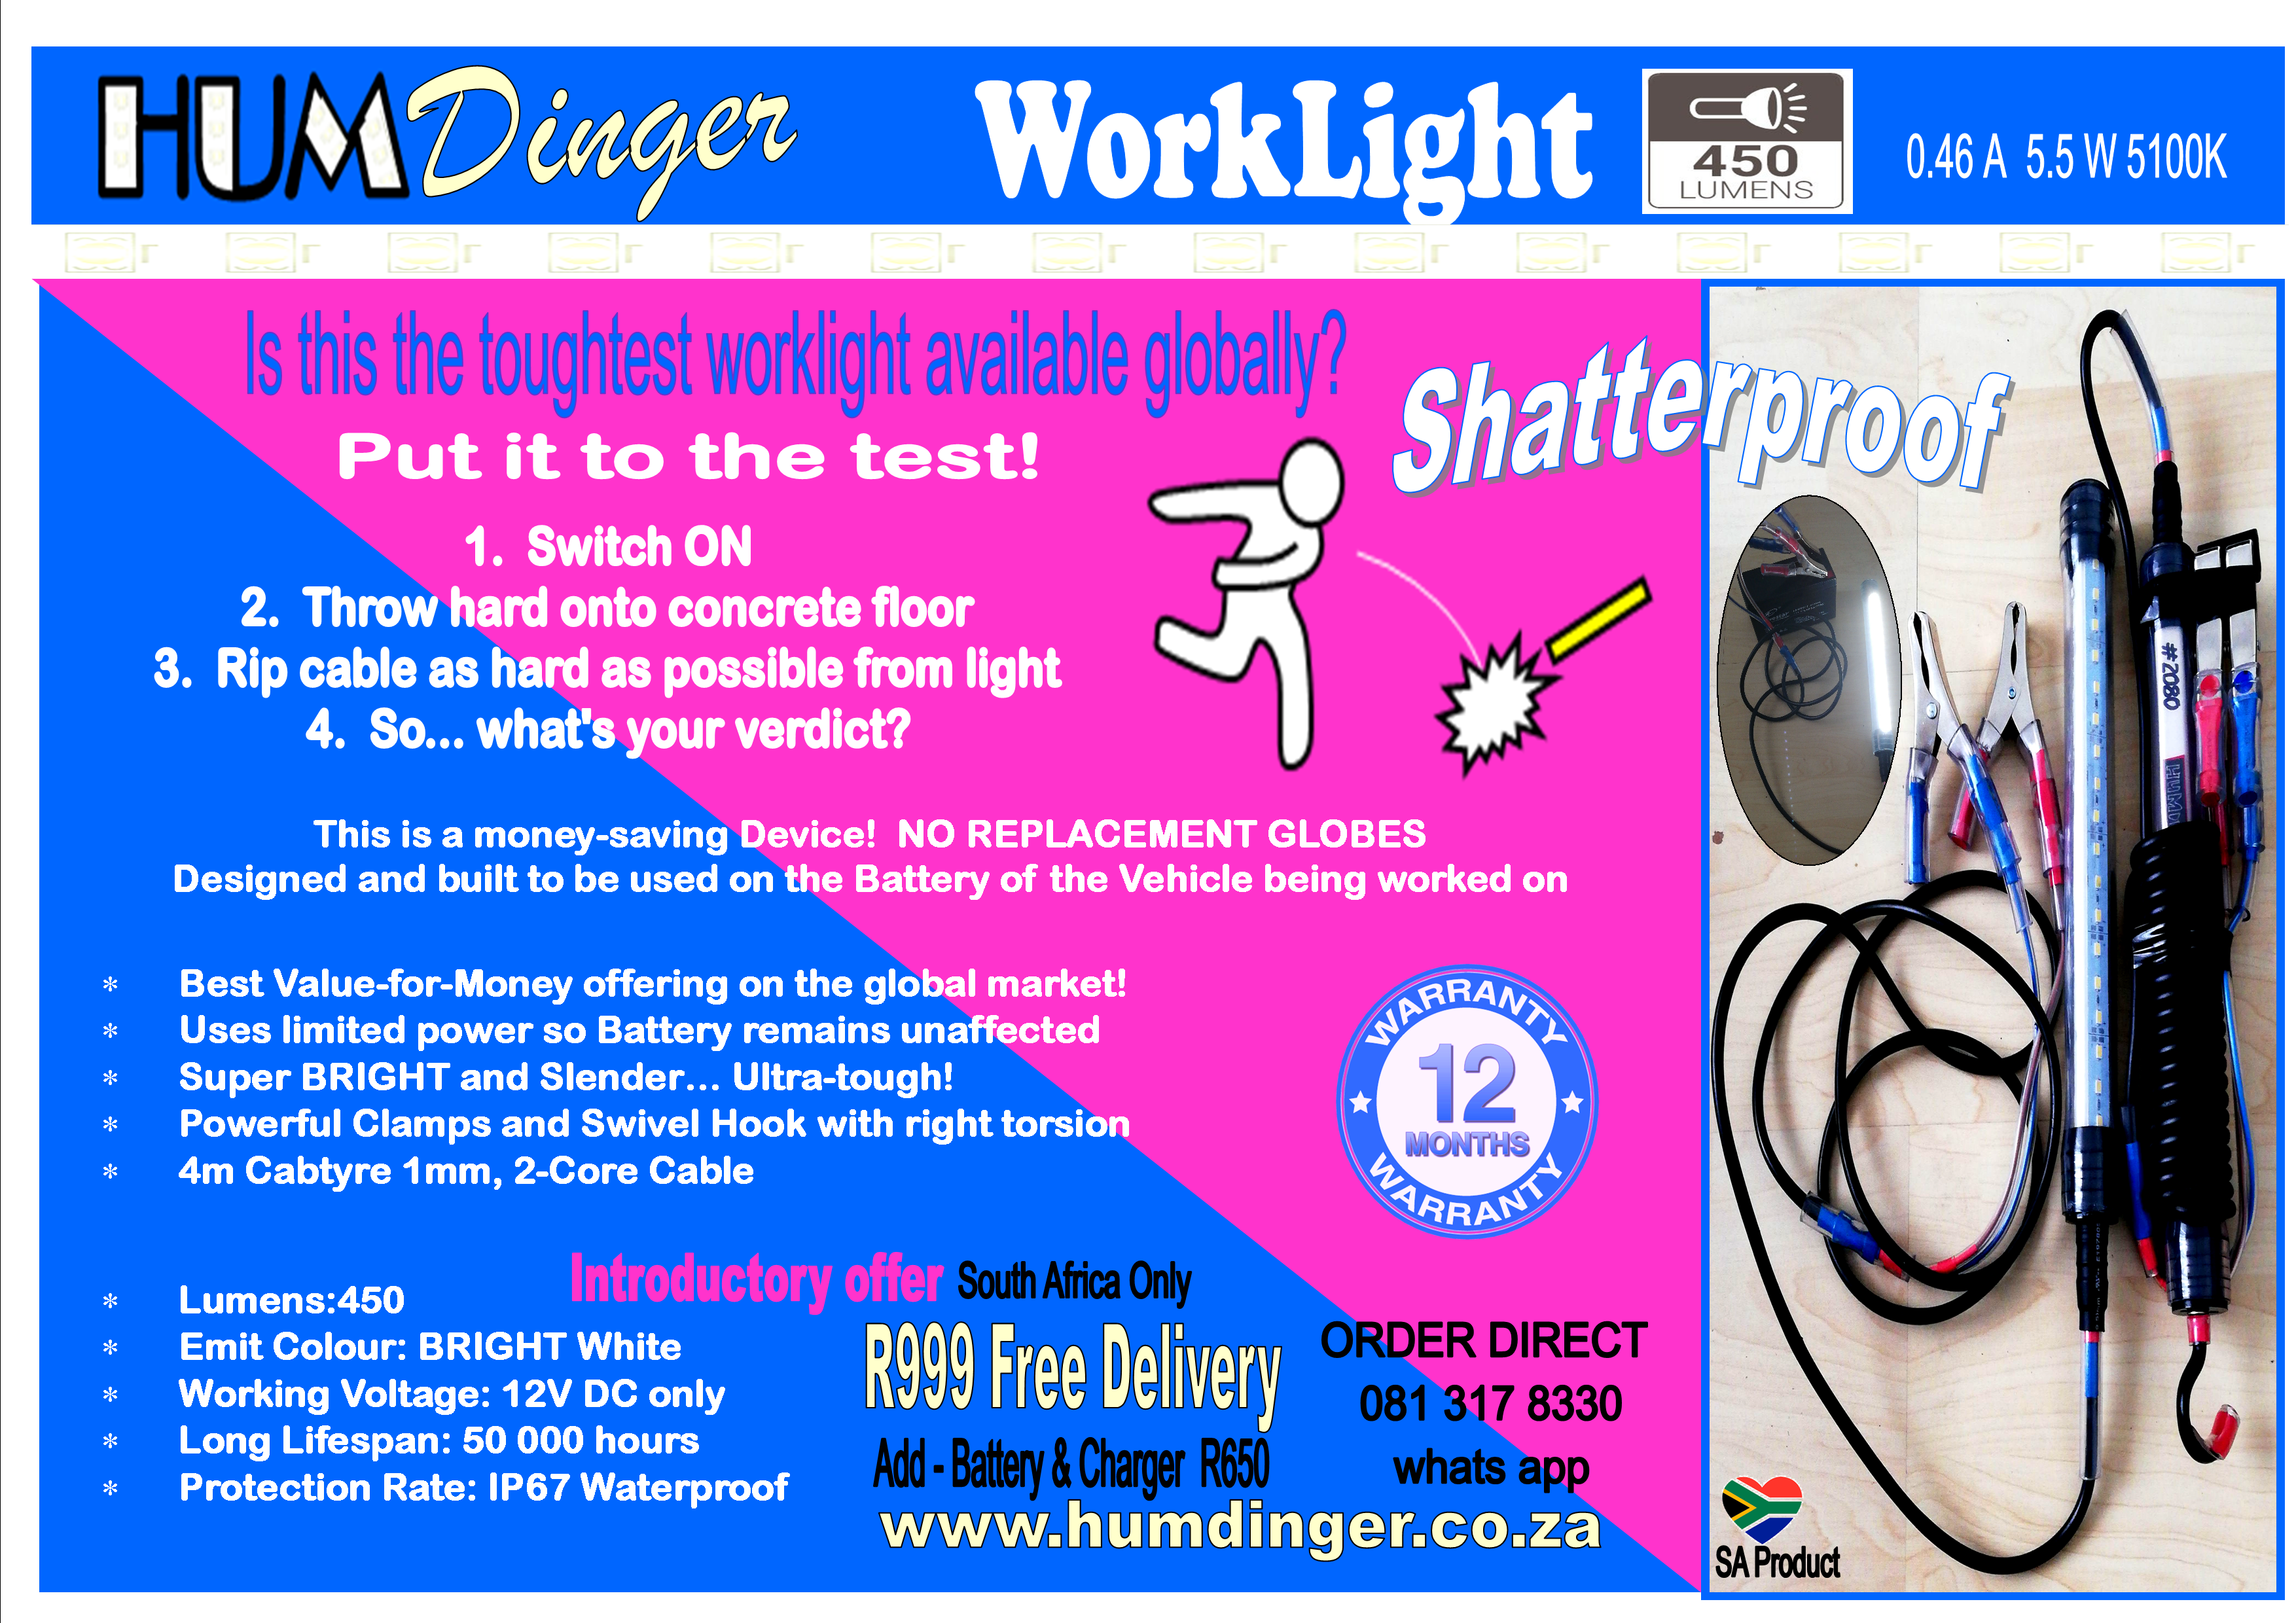 Product image - Humdinger Work Light
This is a money-saving Device!  NO REPLACEMENT GLOBES
Designed and built to be used on the Battery of the Vehicle being worked on
 
	Best Value-for-Money offering on the global market!
	Uses limited power so Battery remains unaffected
	Super BRIGHT and Slender… Ultra-tough! 
	Powerful Clamps and Swivel Hook with right torsion
	4m Cabtyre 1mm, 2-Core Cable

	Lumens:450
	Emit Colour: BRIGHT 